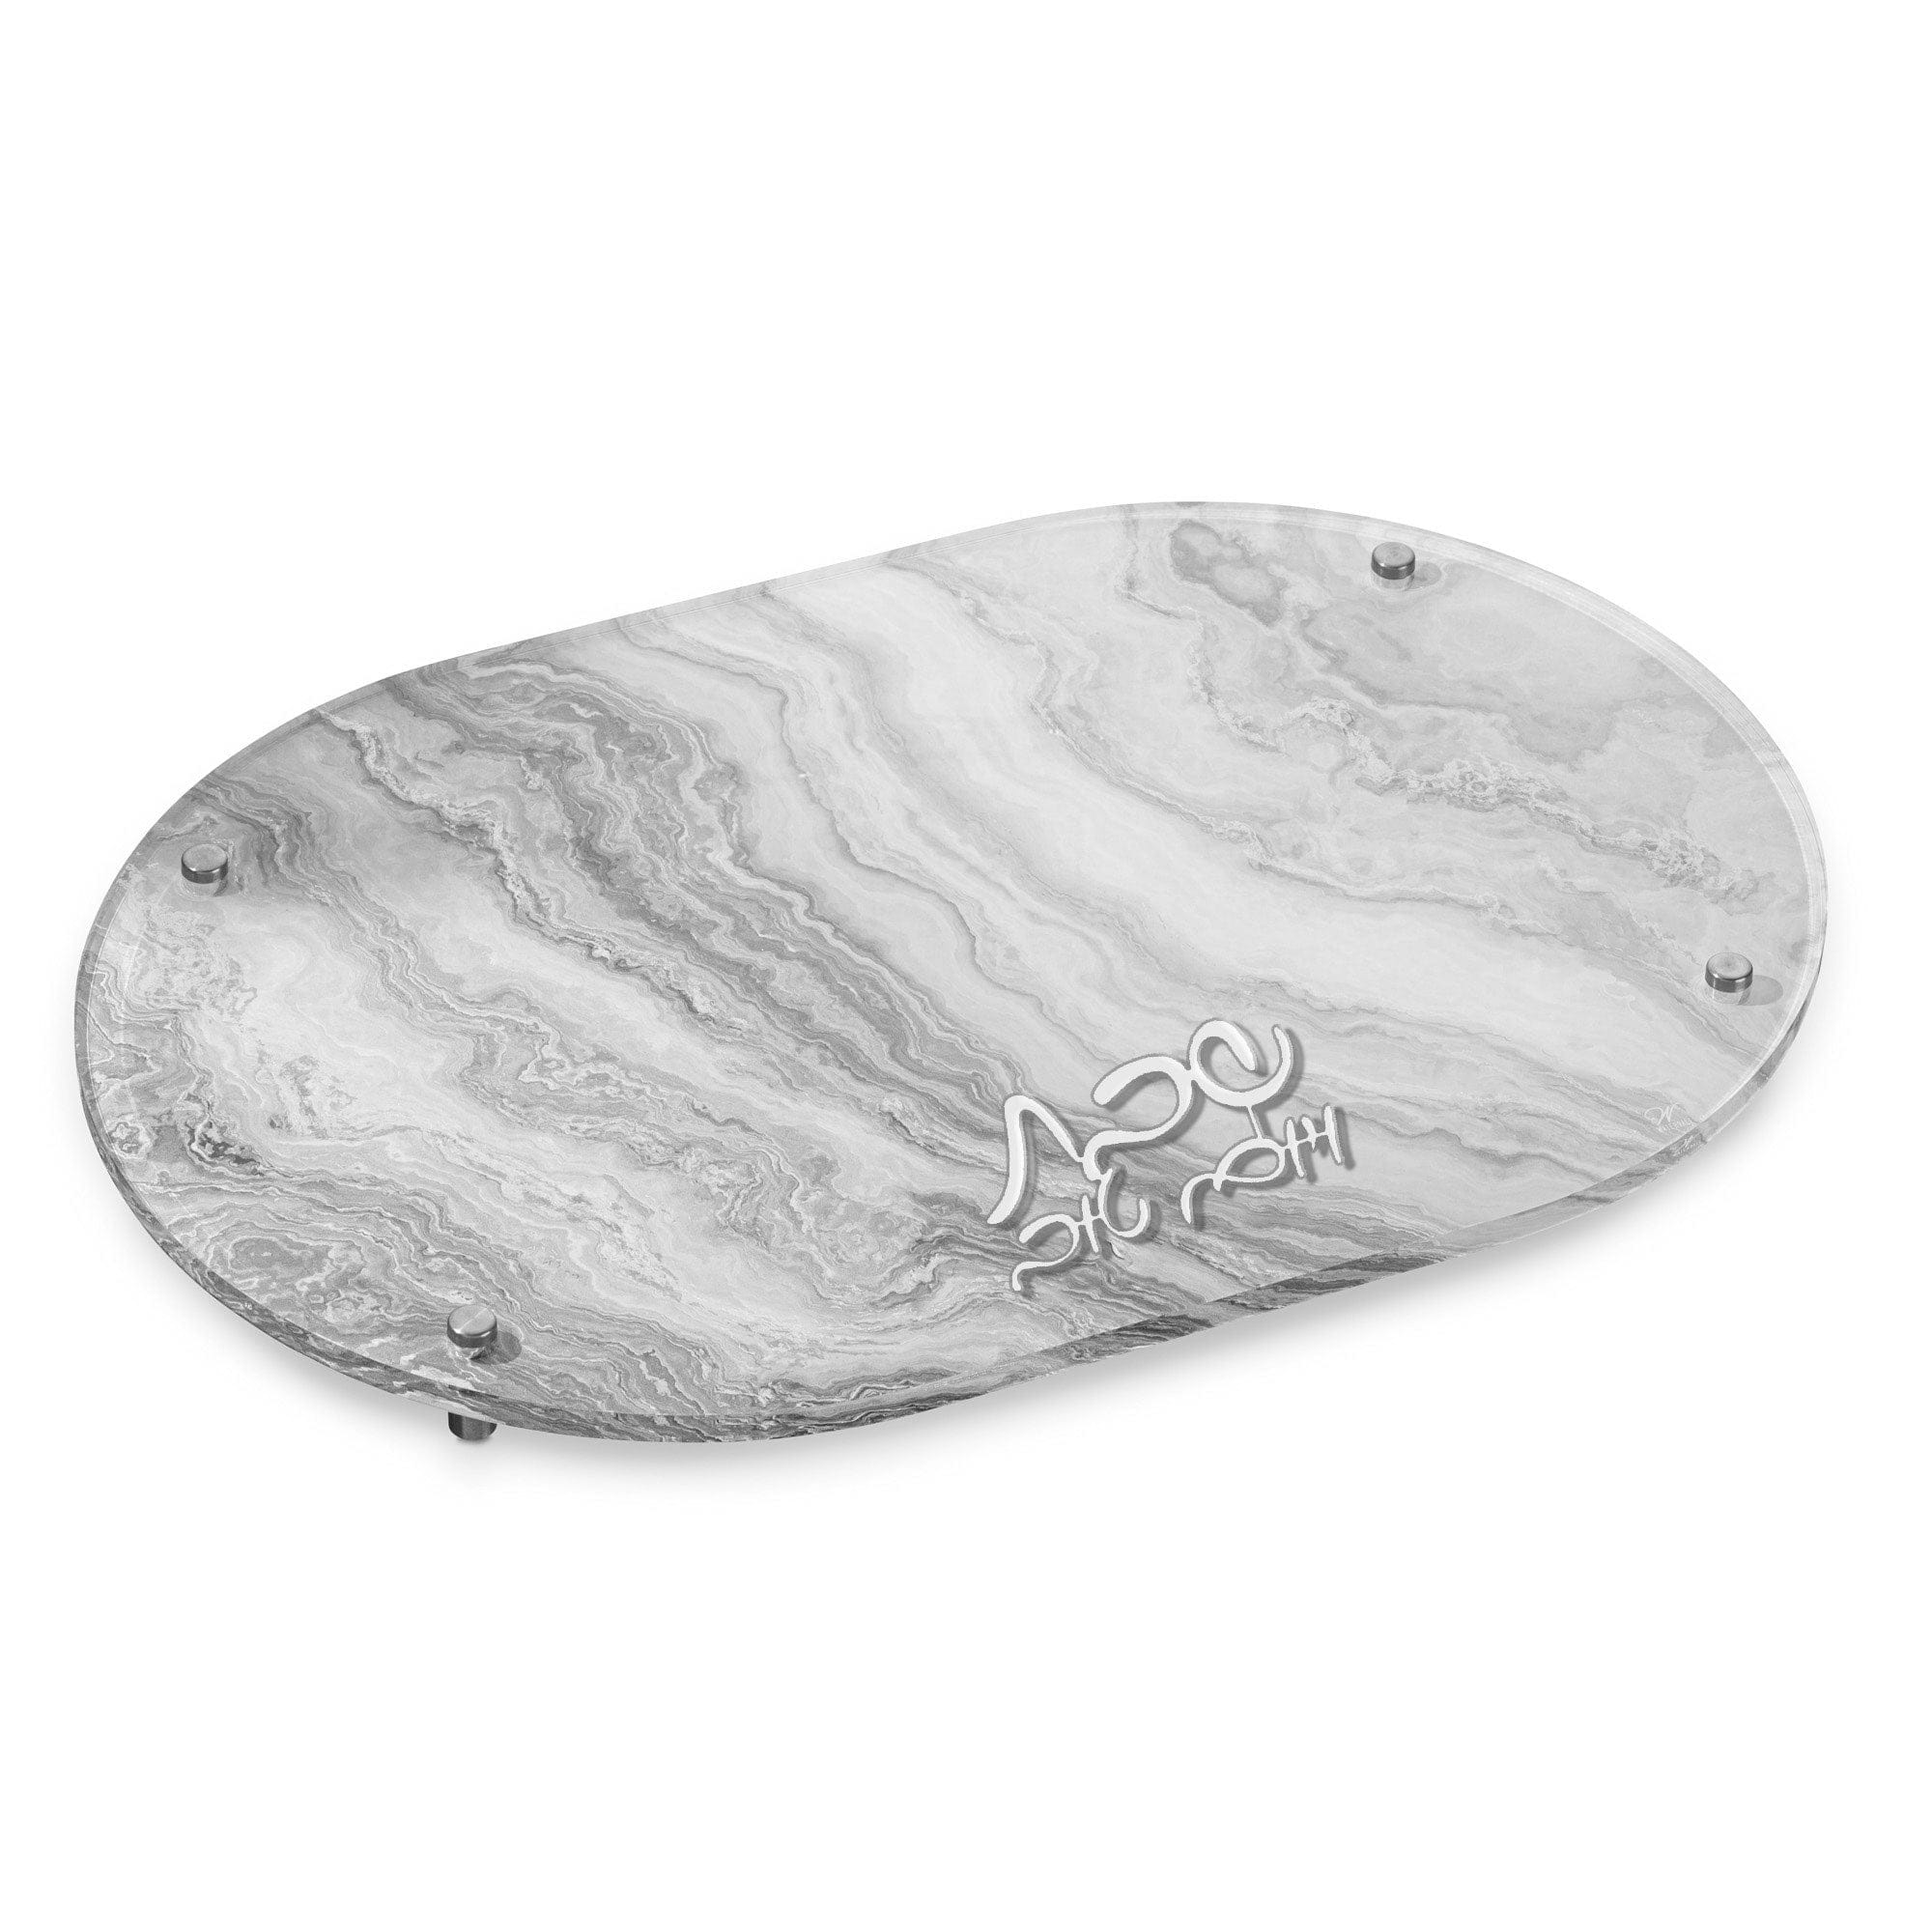 Agate Challah Board Small / Hadlokas Neiros Tray - Waterdale Collection